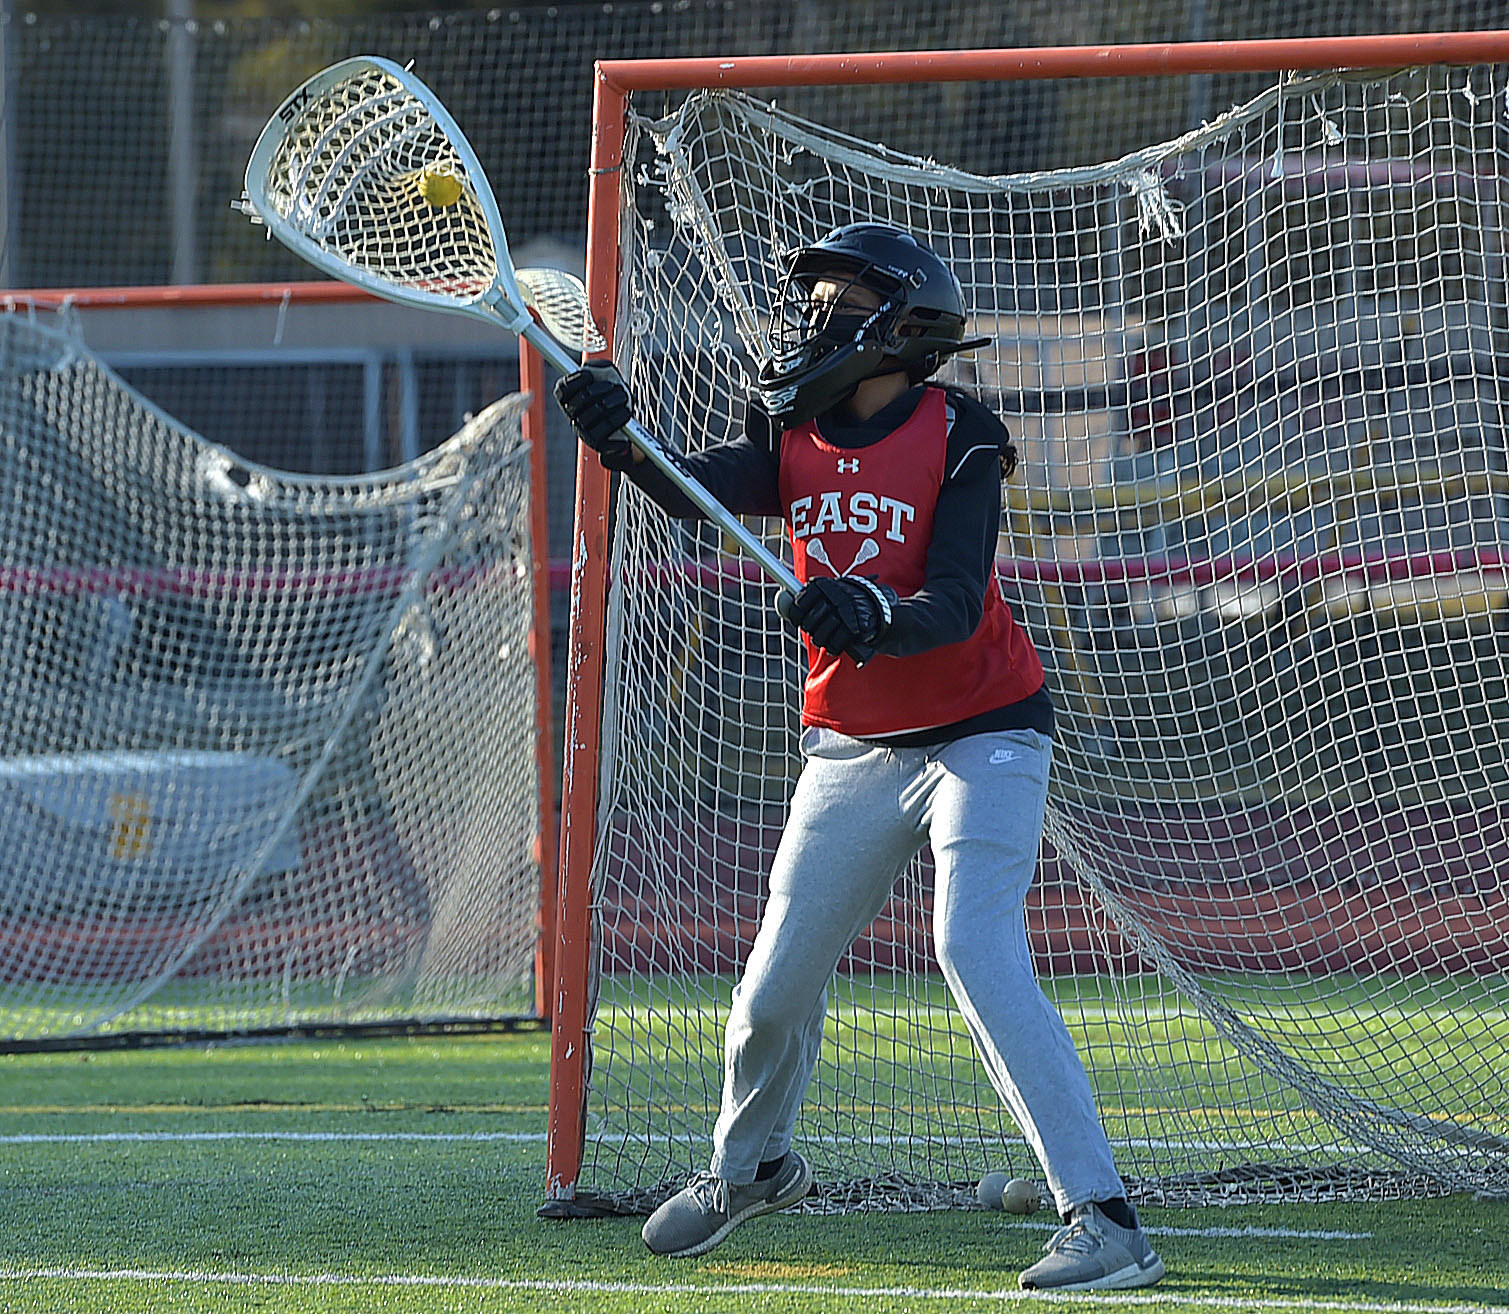 a person playing lacrosse